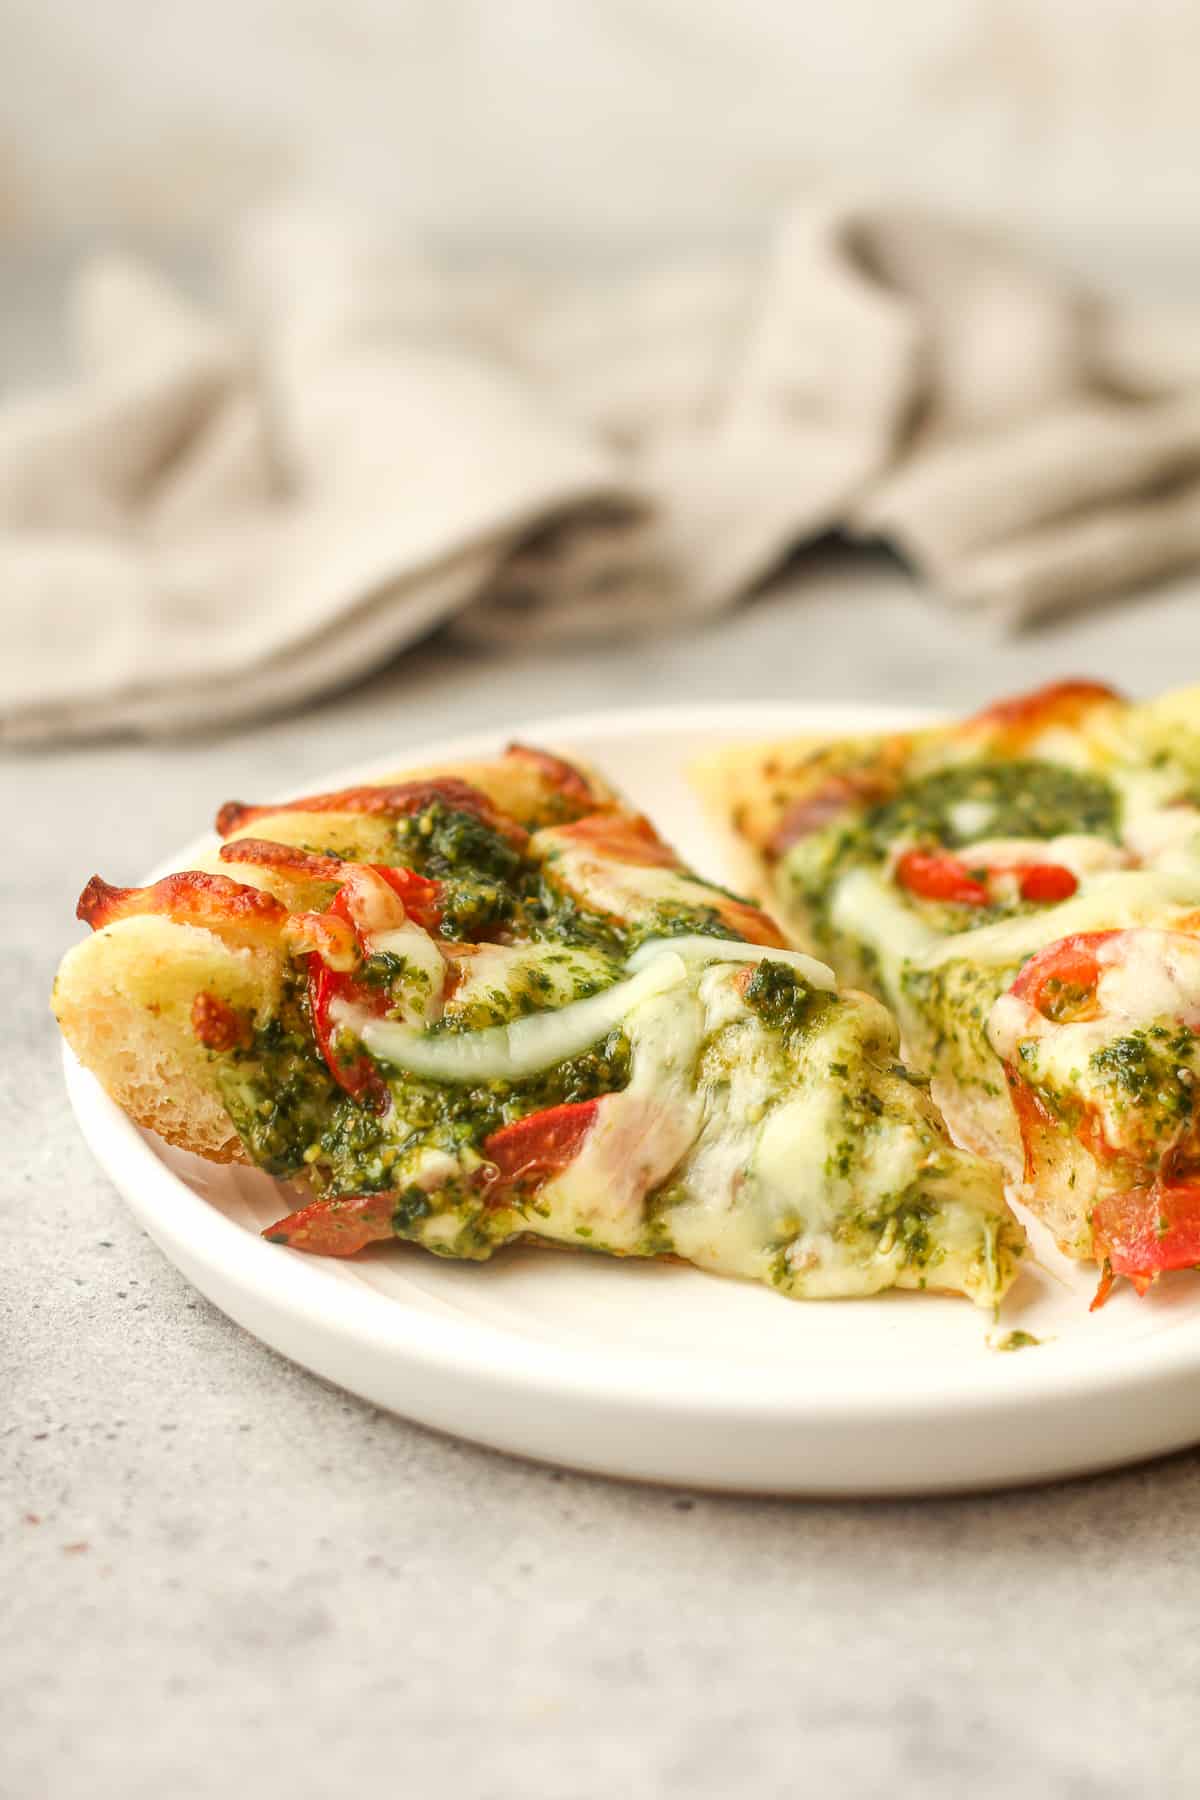 Side view of a plate with two slices of pesto pizza.